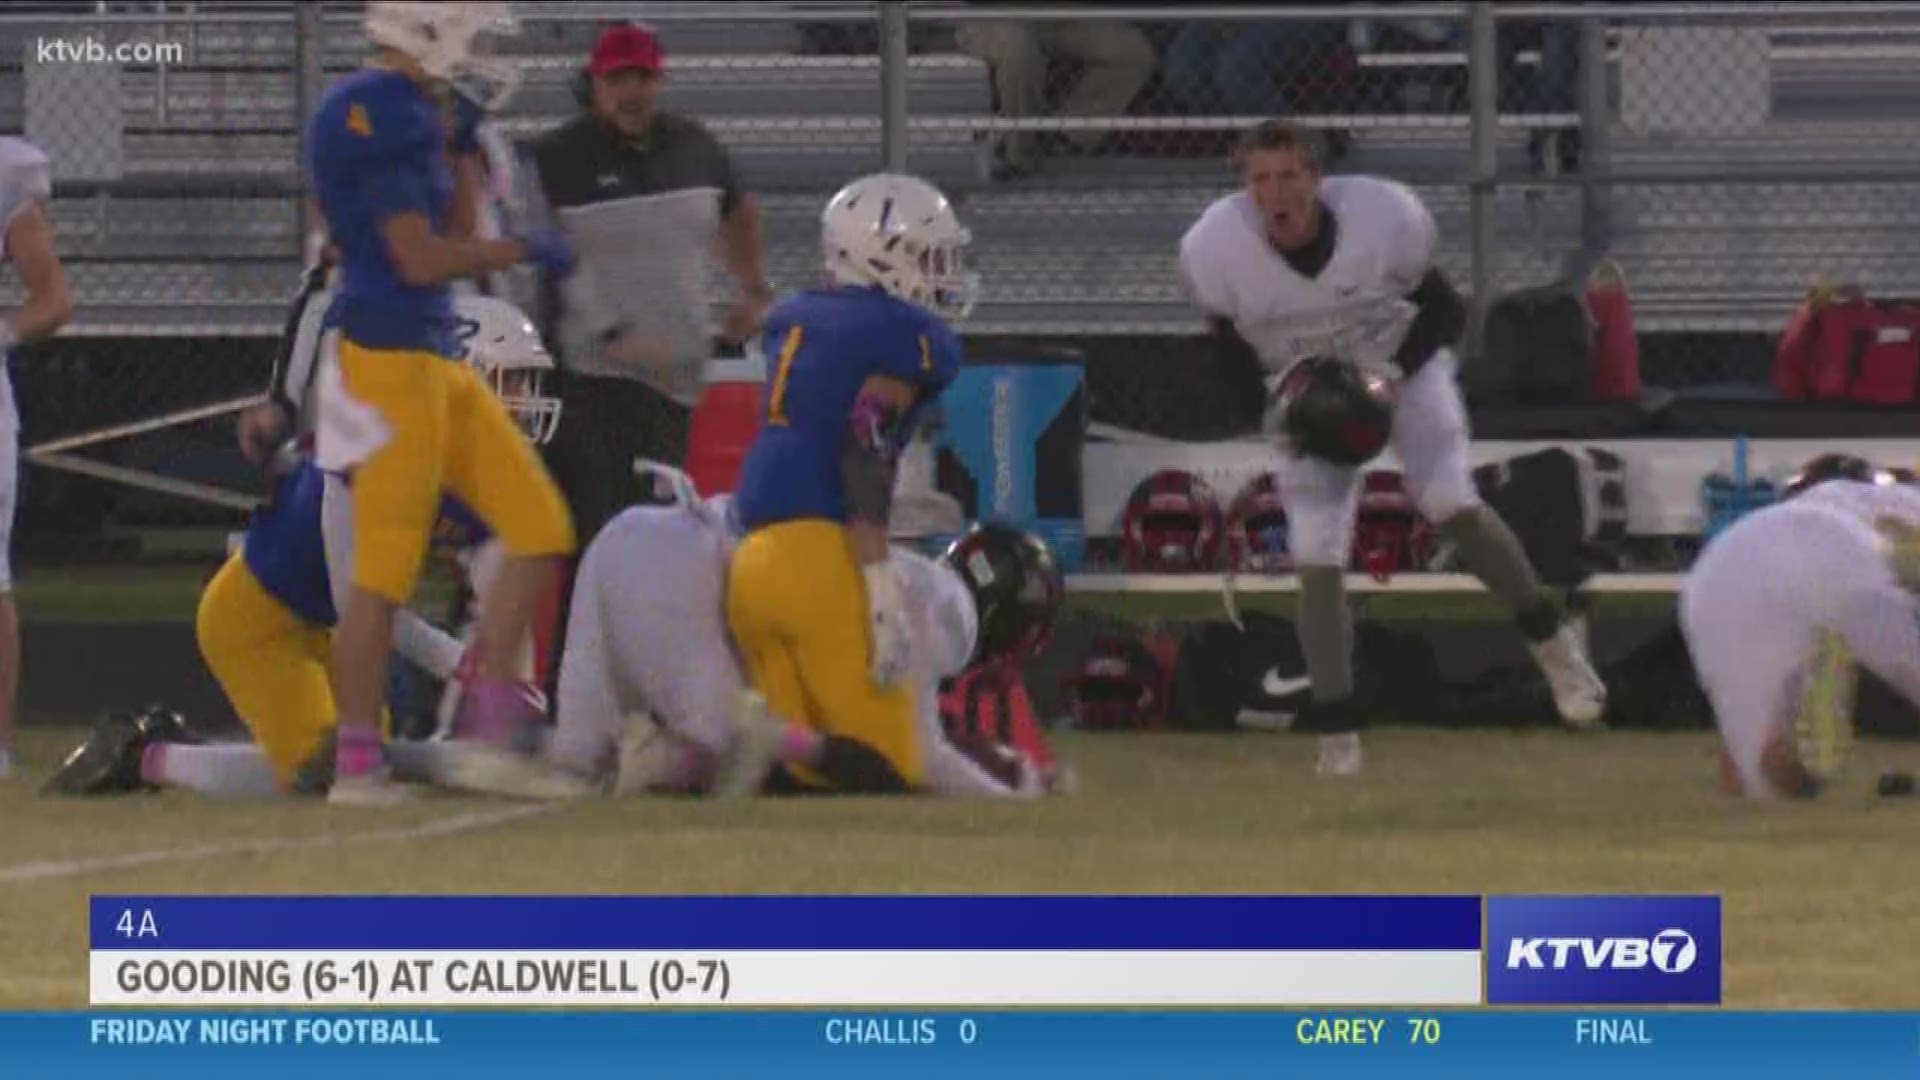 The Senators showed no sign of gridlock in this 46-6 win over Caldwell.